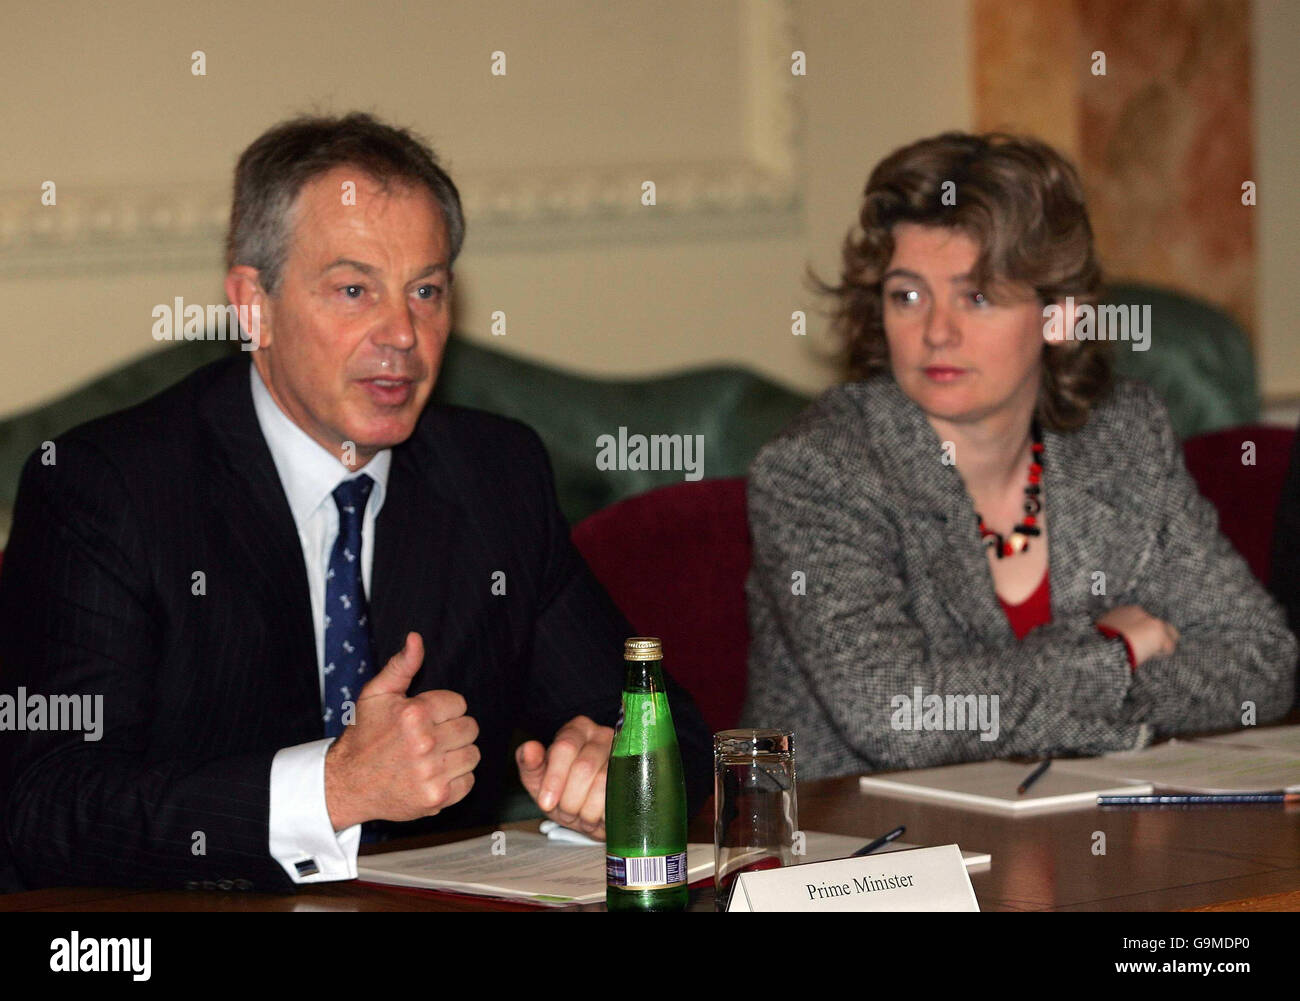 British Prime Minister Tony Blair (left) and Secretary of State for Communities and Local Government Ruth Kelly (right) address a meeting about social housing at Downing Street, London. Stock Photo